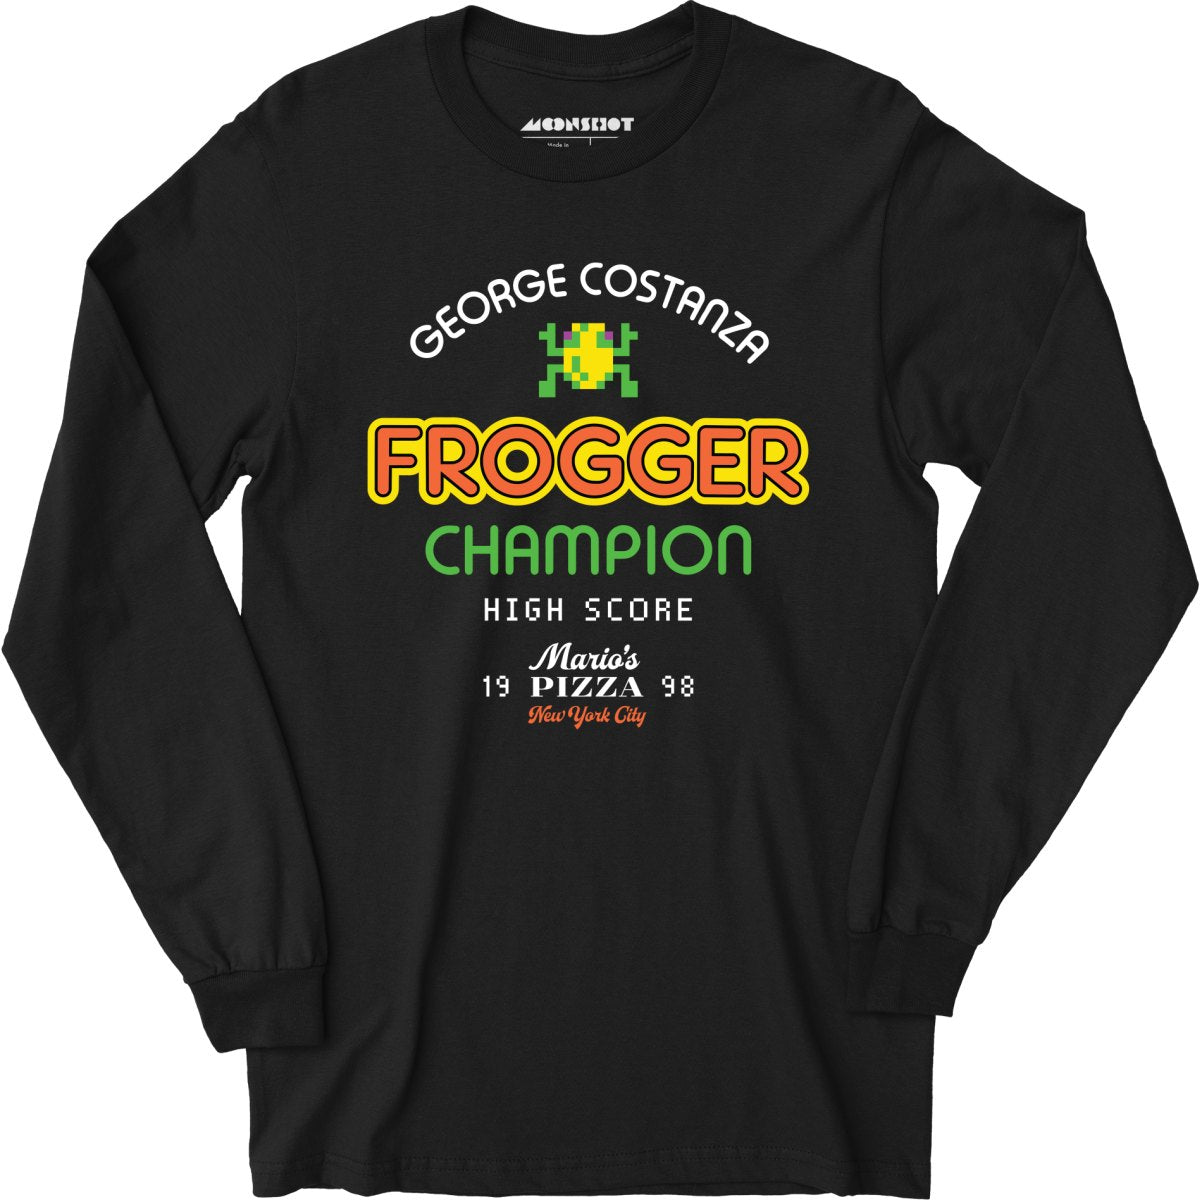 George Costanza Frogger Champion - Mario's Pizza - Long Sleeve T-Shirt